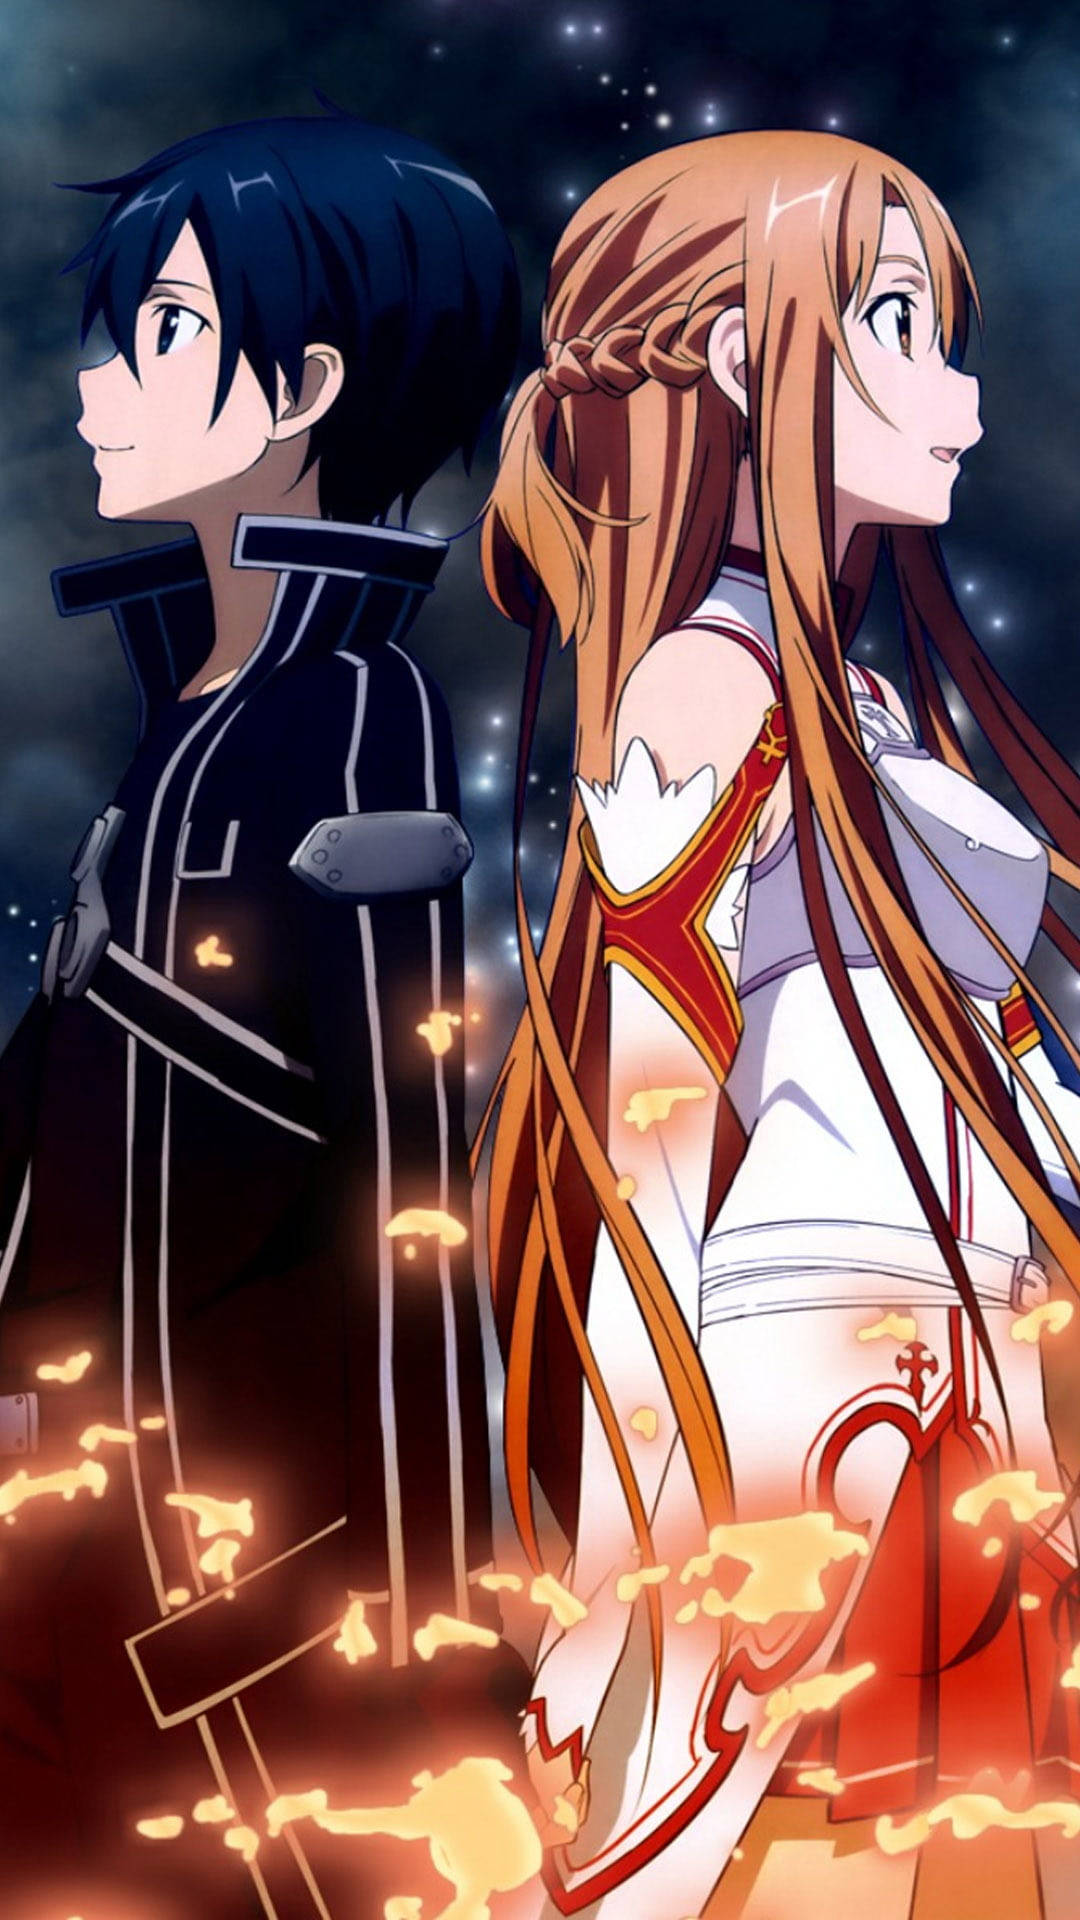 Enchanted Love Story In The Digital Realm - Kirito And Asuna From Sword Art Online Background